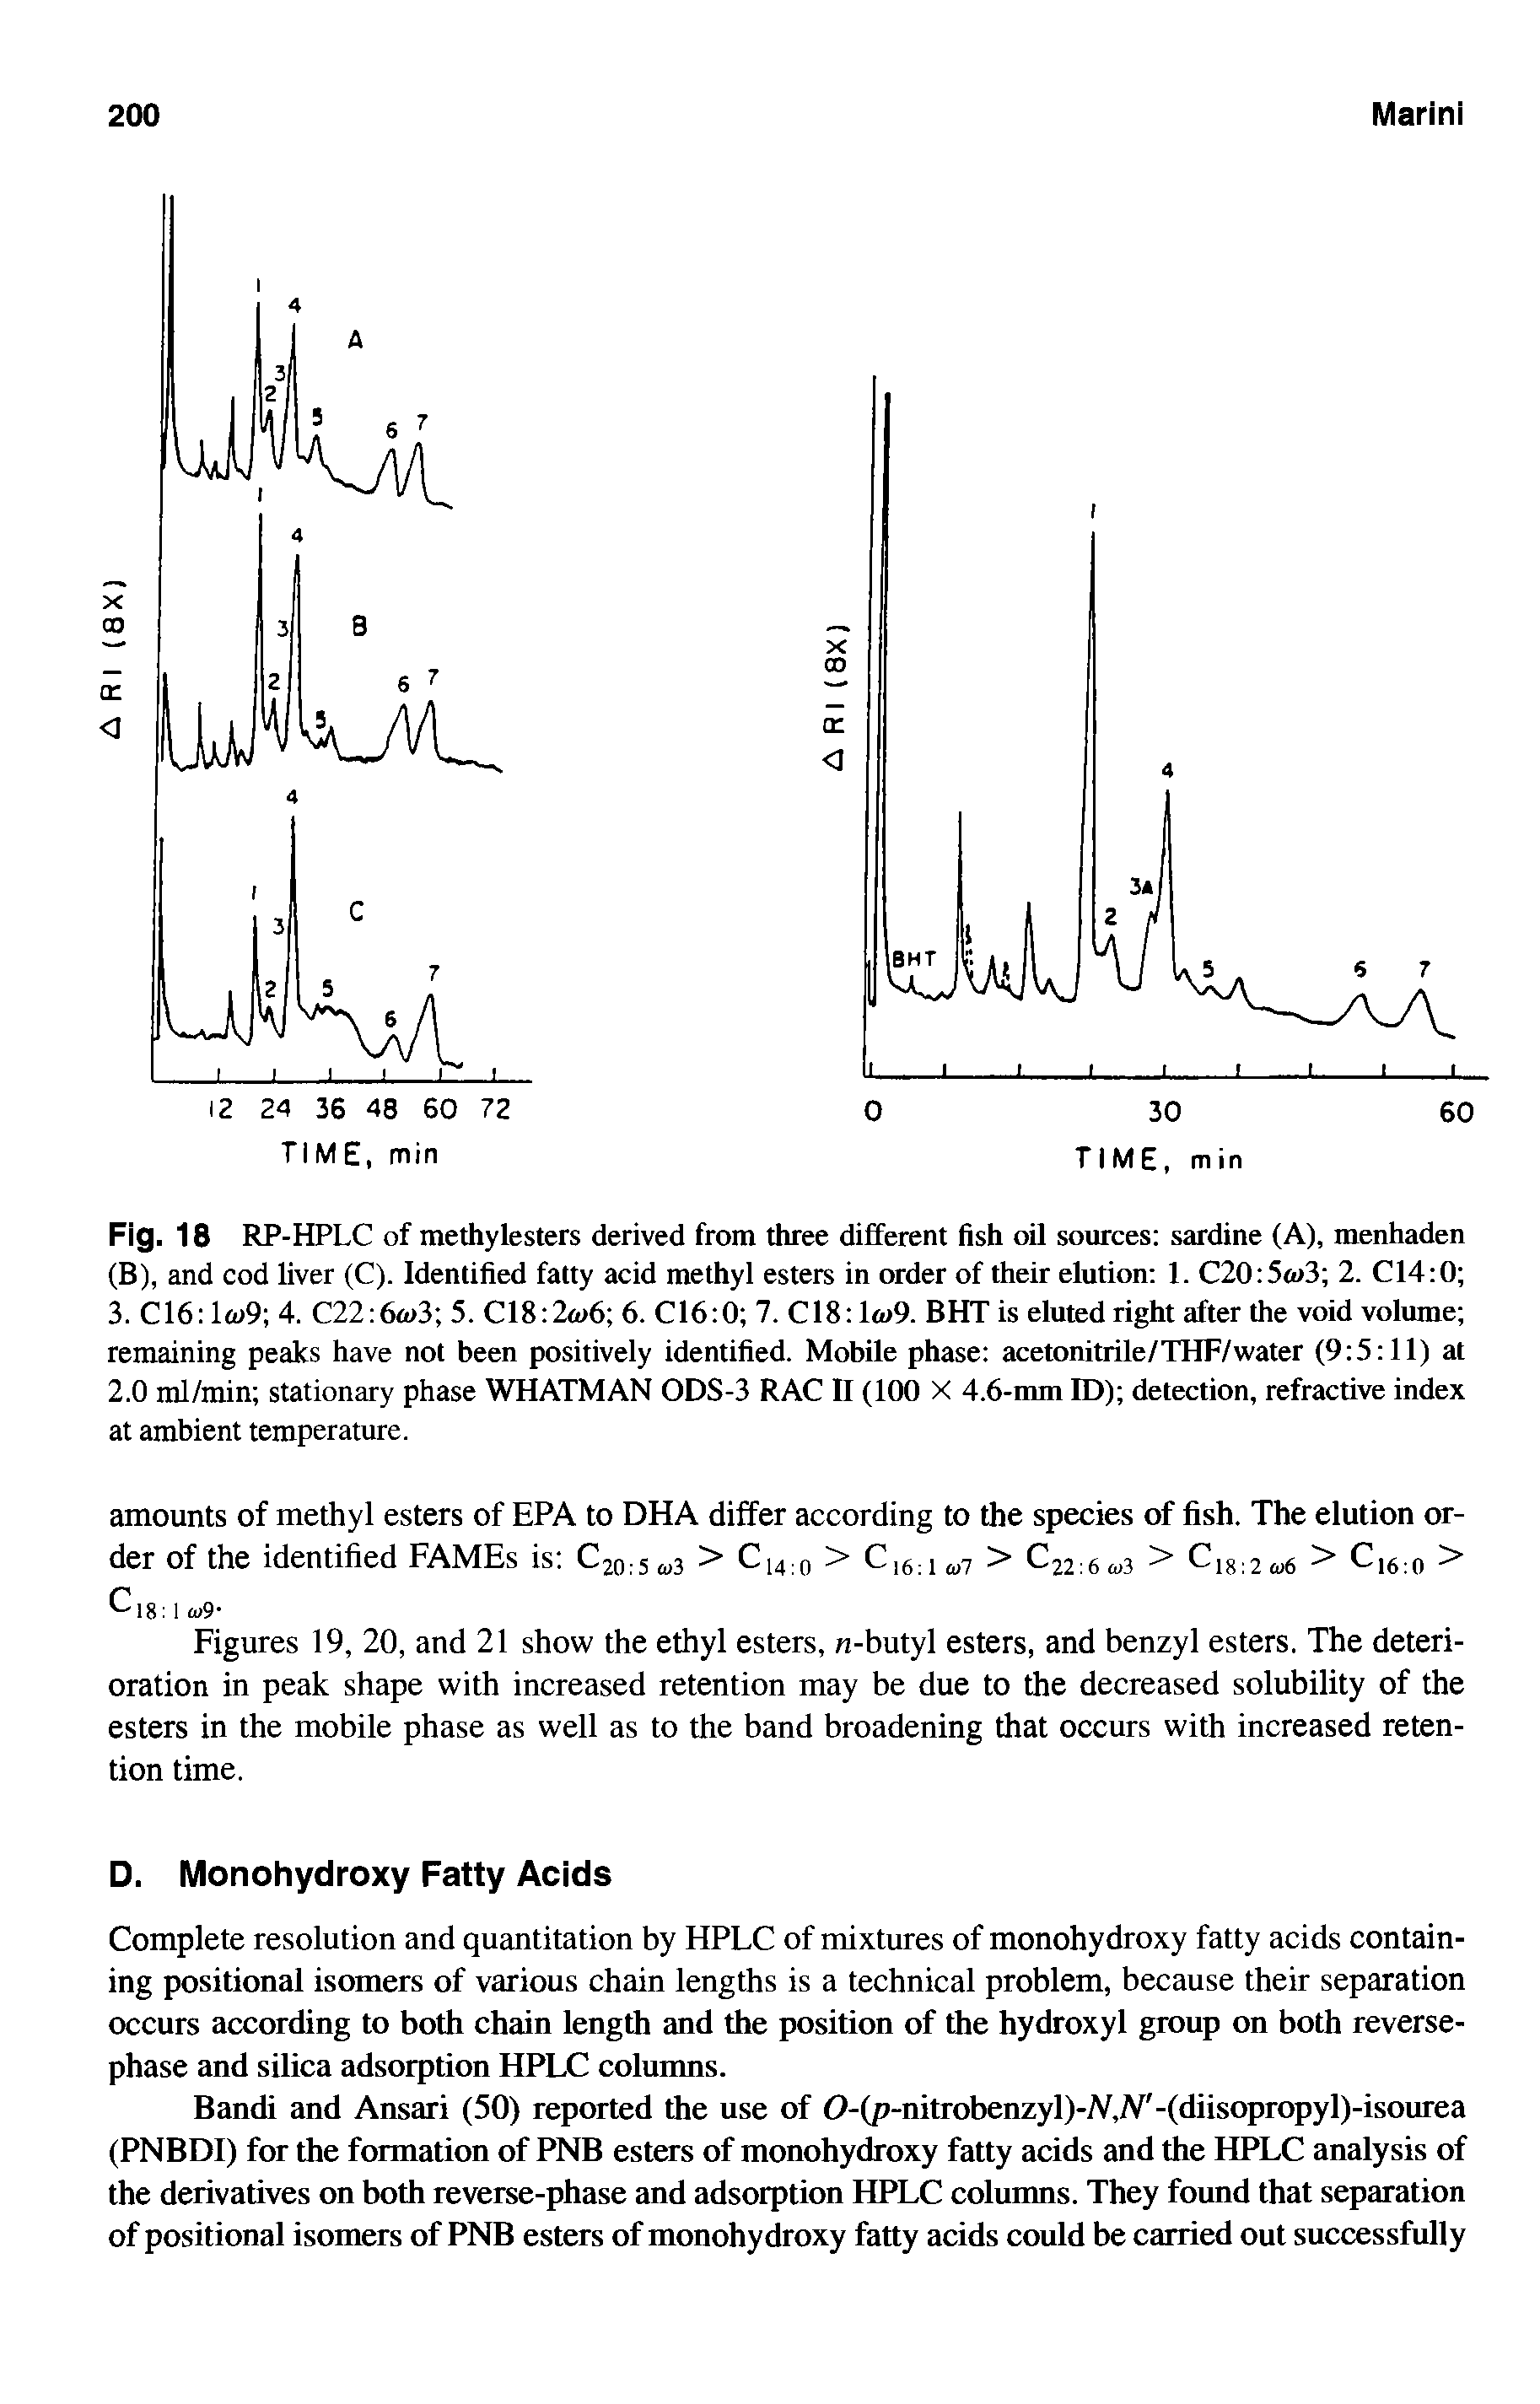 Fig. 18 RP-HPLC of methylesters derived from three different fish oil sources sardine (A), menhaden (B), and cod liver (C). Identified fatty acid methyl esters in order of their elution 1. C20 5o 3 2. C14 0 3. C16 lw9 4. C22 6o>3 5. C18 2a>6 6. C16 0 7. C18 1 >9. BHT is eluted right after the void volume remaining peaks have not been positively identified. Mobile phase acetonitrile/THF/water (9 5 11) at 2.0 ml/min stationary phase WHATMAN ODS-3 RAC II (100 X 4.6-mm ID) detection, refractive index at ambient temperature.